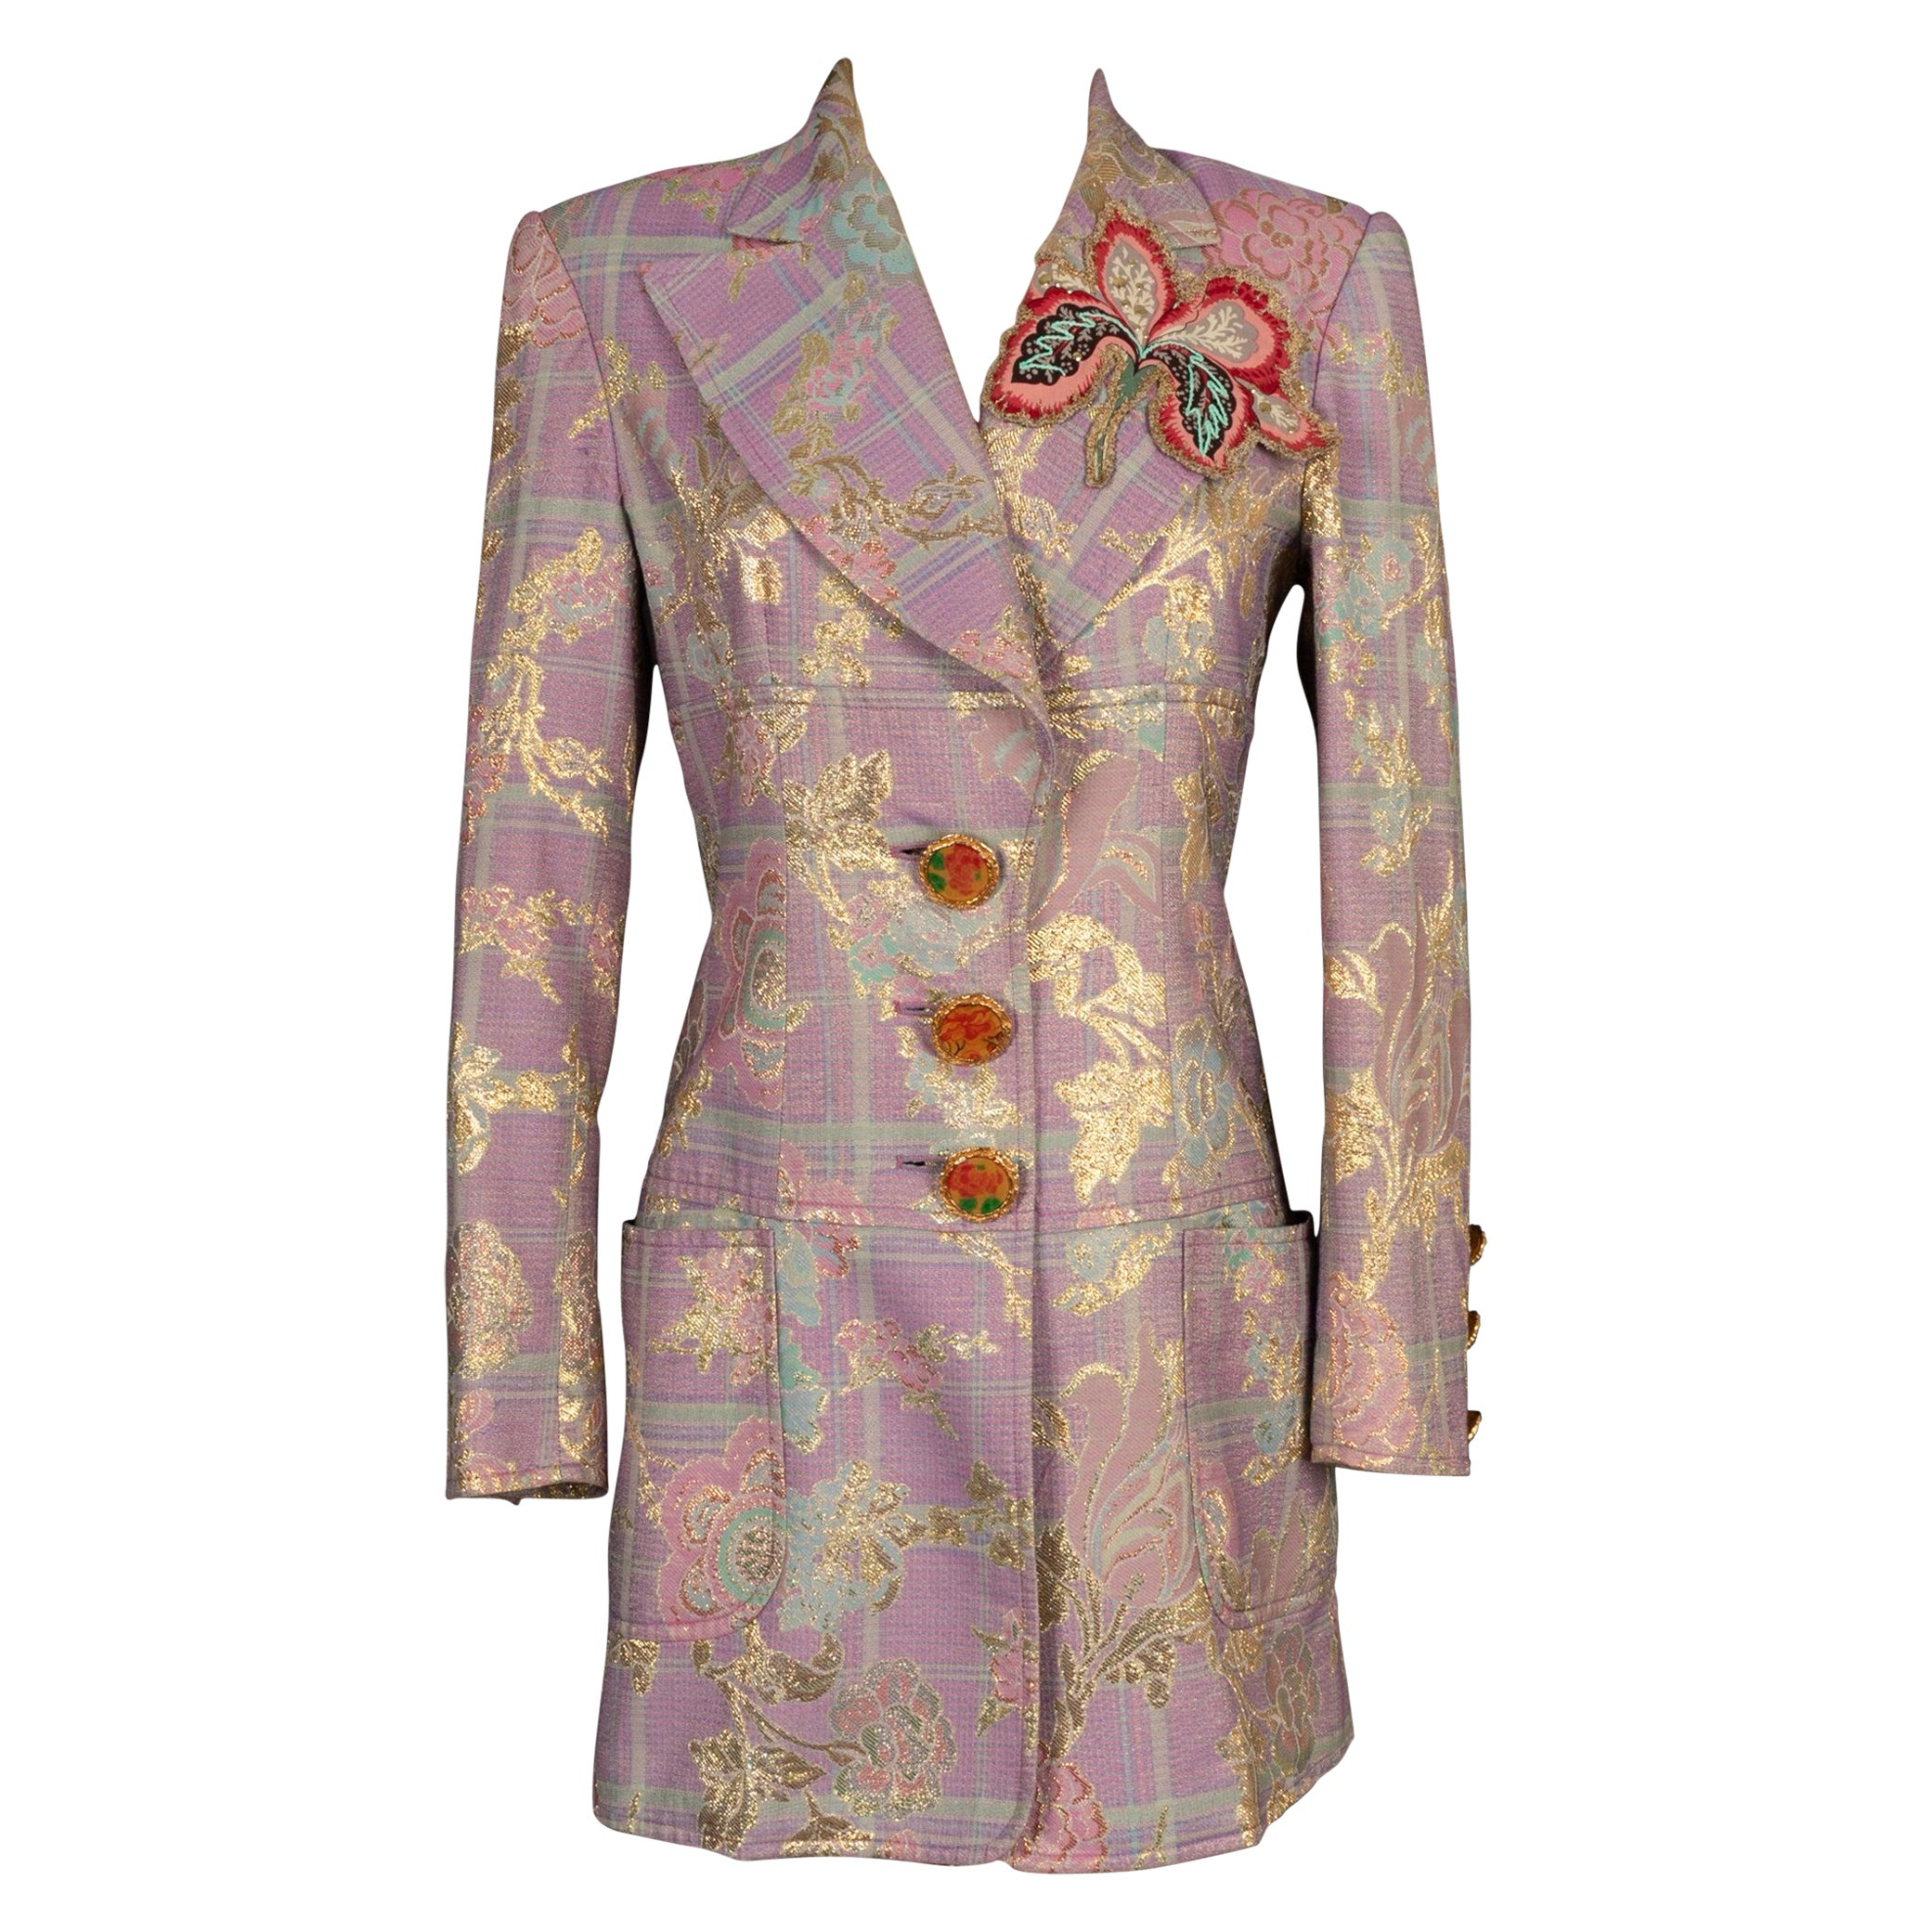 Christian Lacroix Embroidered Jacket Enhanced with Lurex Yarns, 1990s For Sale